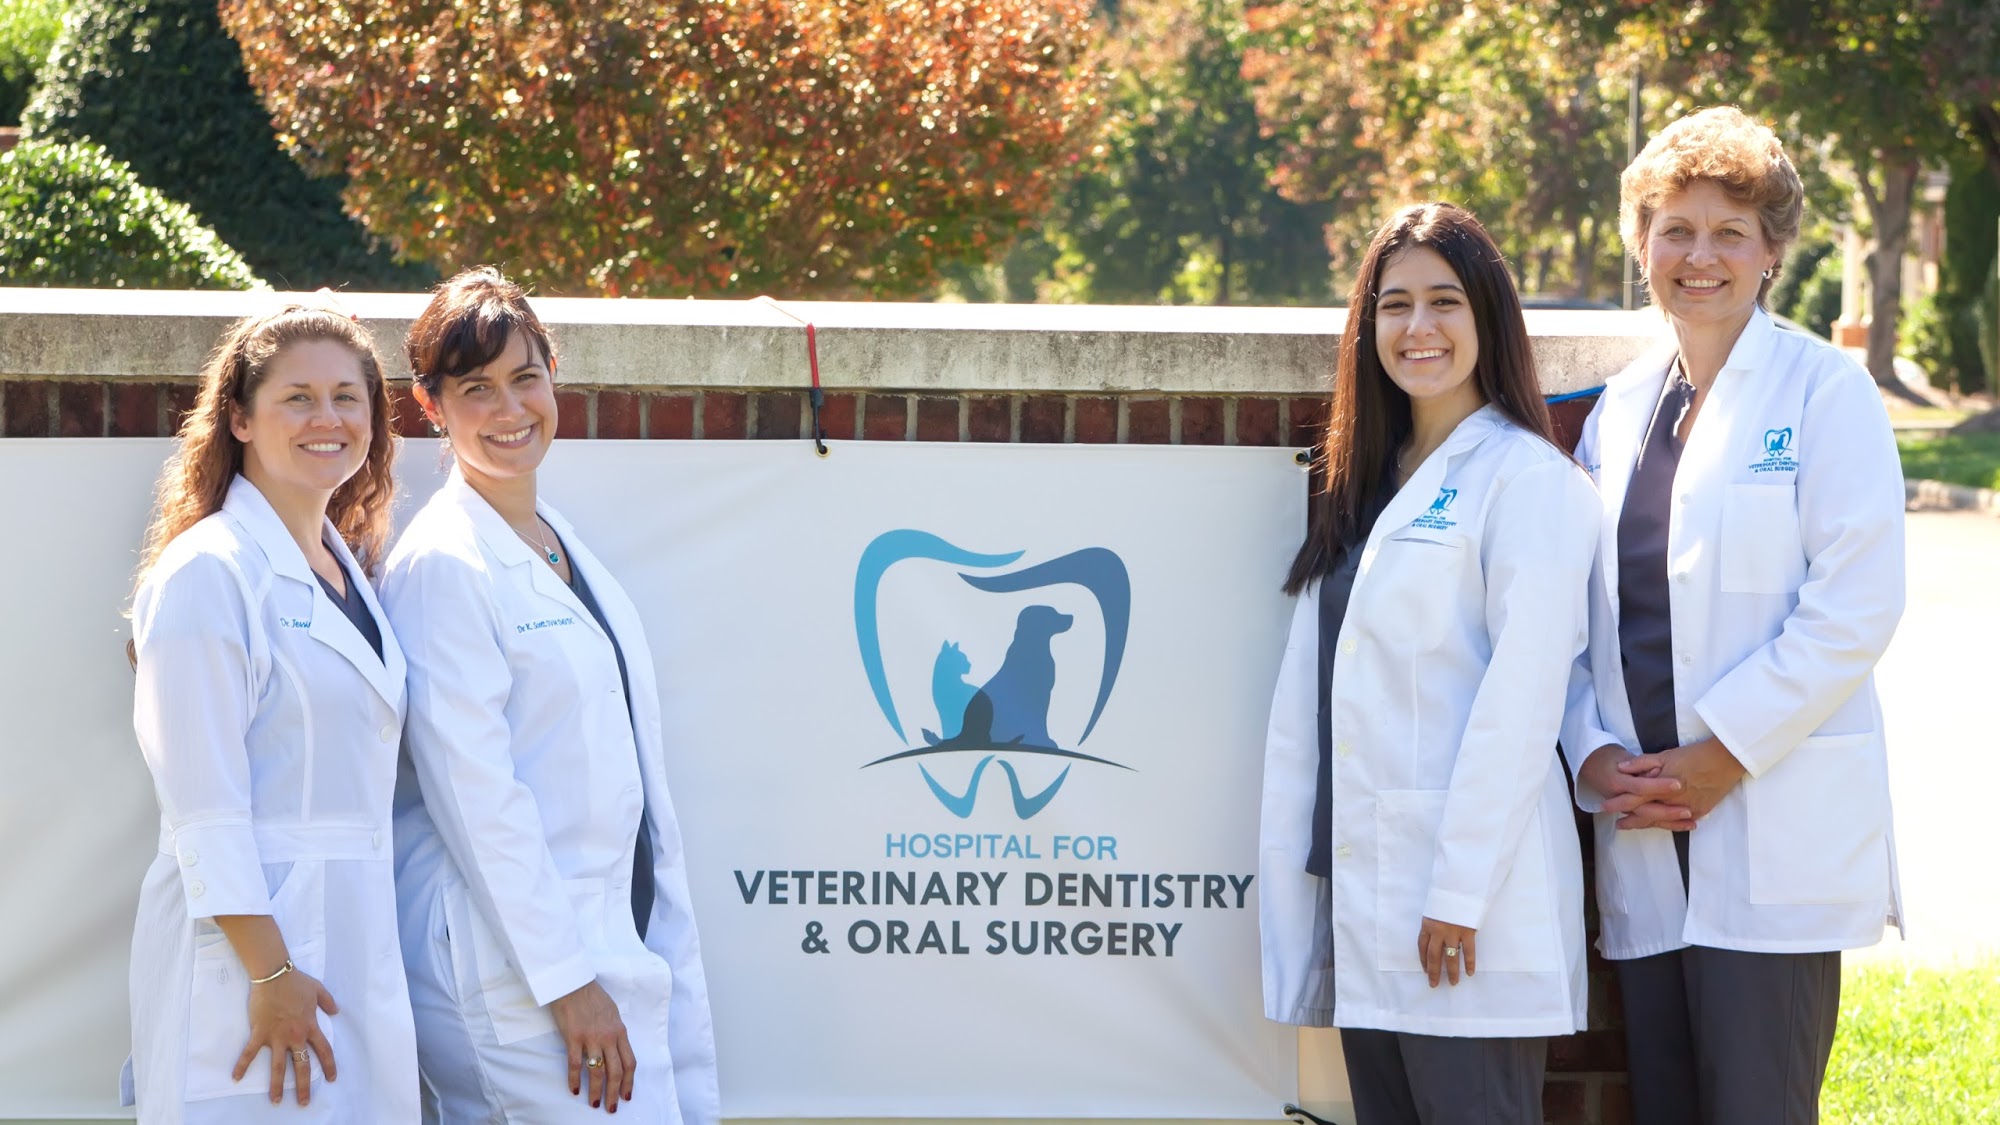 Hospital for Veterinary Dentistry and Oral Surgery